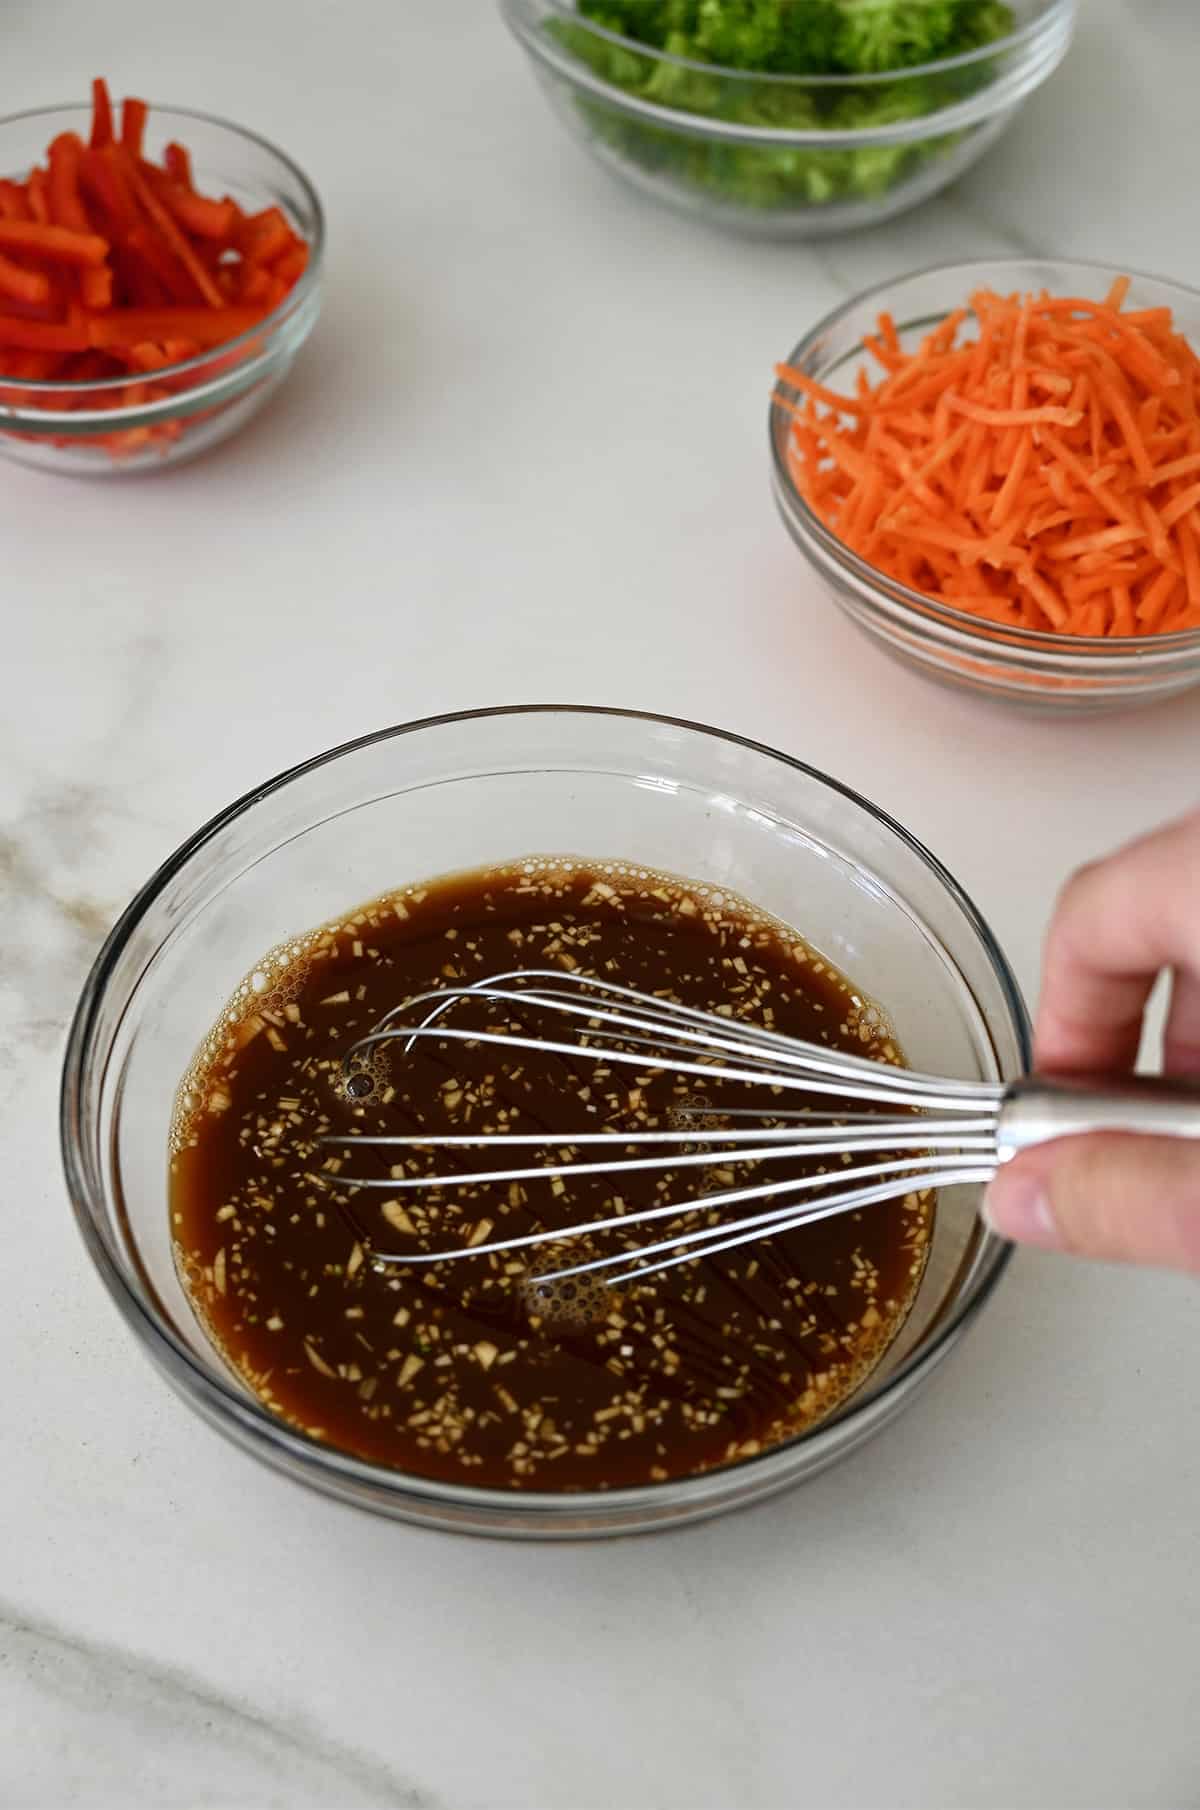 A hand holds a whisk into a small glass bowl containing teriyaki stir fry sauce.